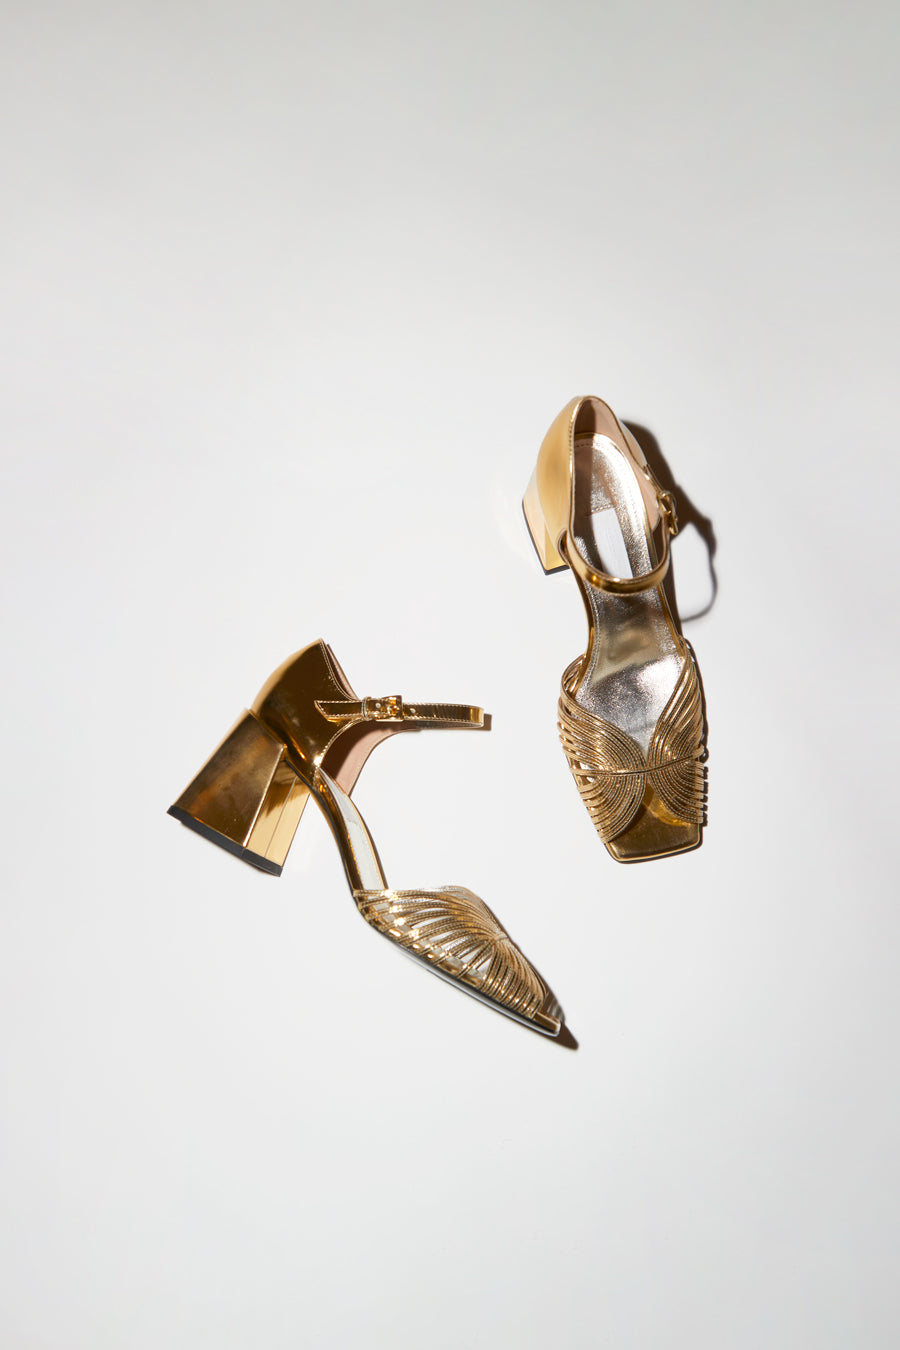 Suzanne Rae High Heel 70’s Strappy Sandal in Gold High Shine Leather